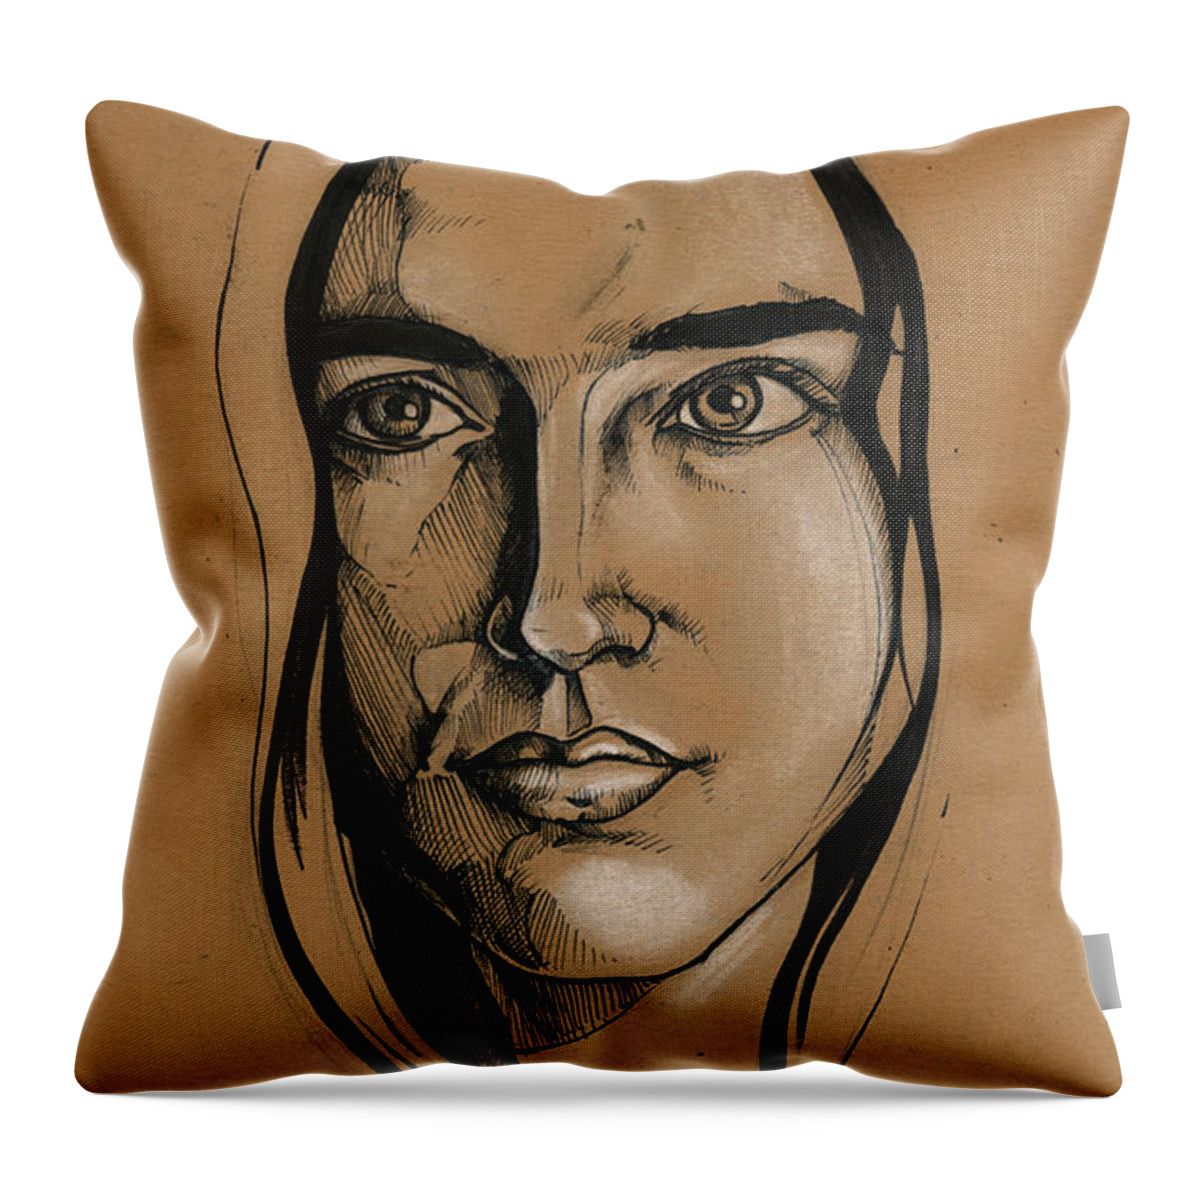 Portrait Throw Pillow featuring the drawing Jennifer Connelly by John Ashton Golden